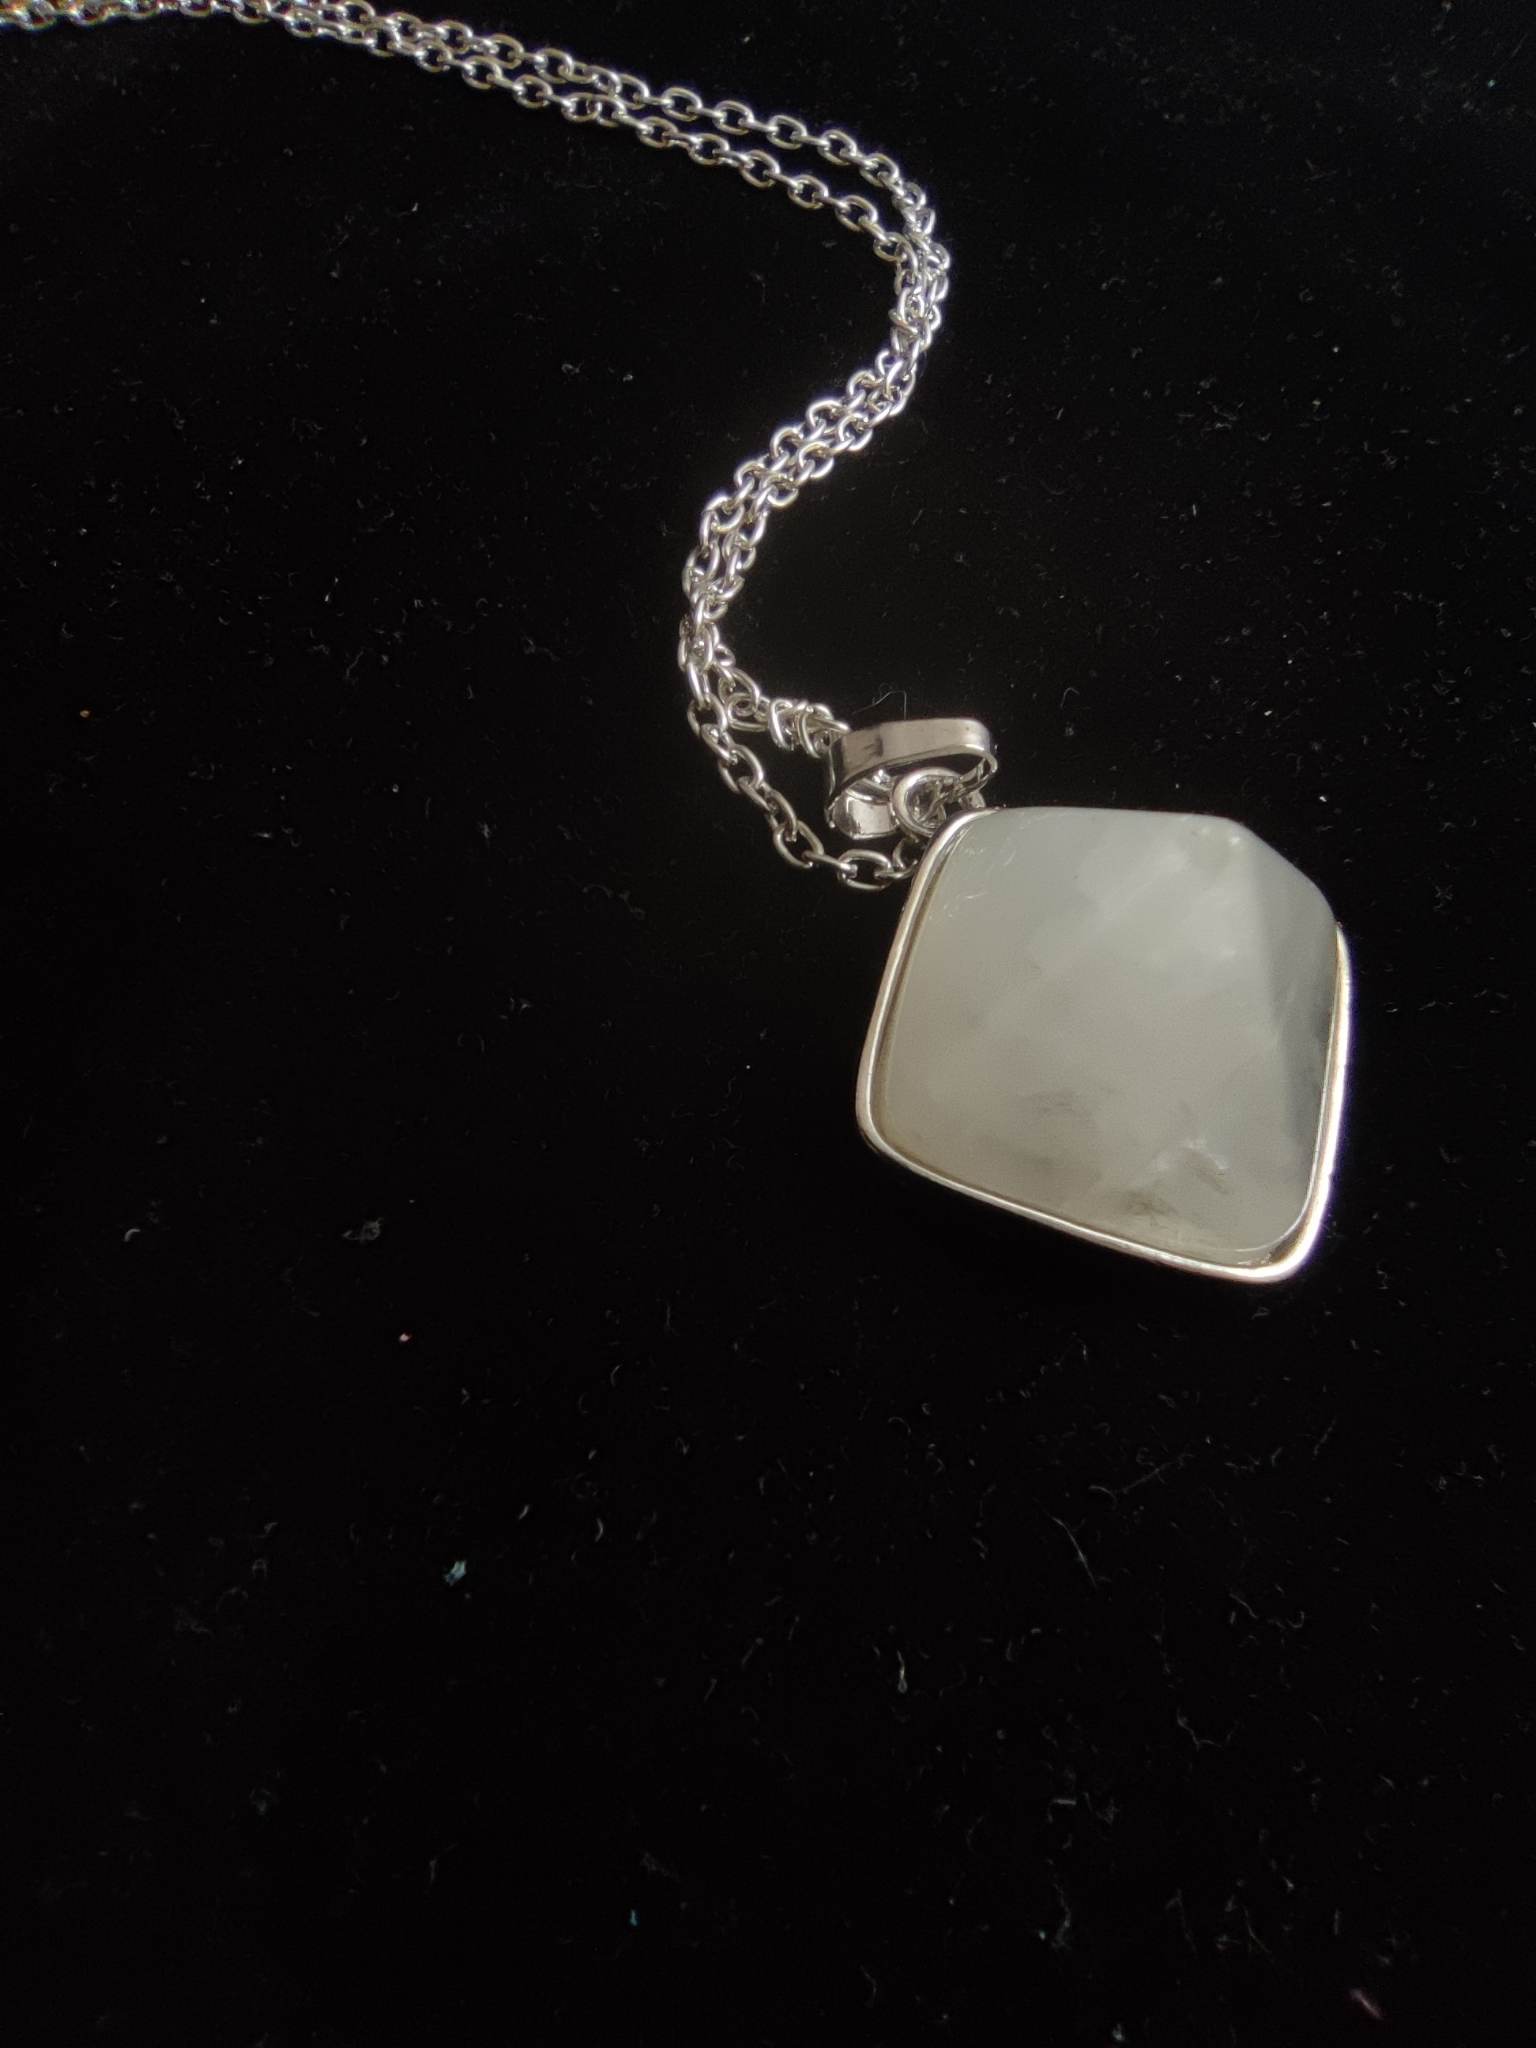 Magical necklace - talisman for luck and purifying energy - quartz pyramid